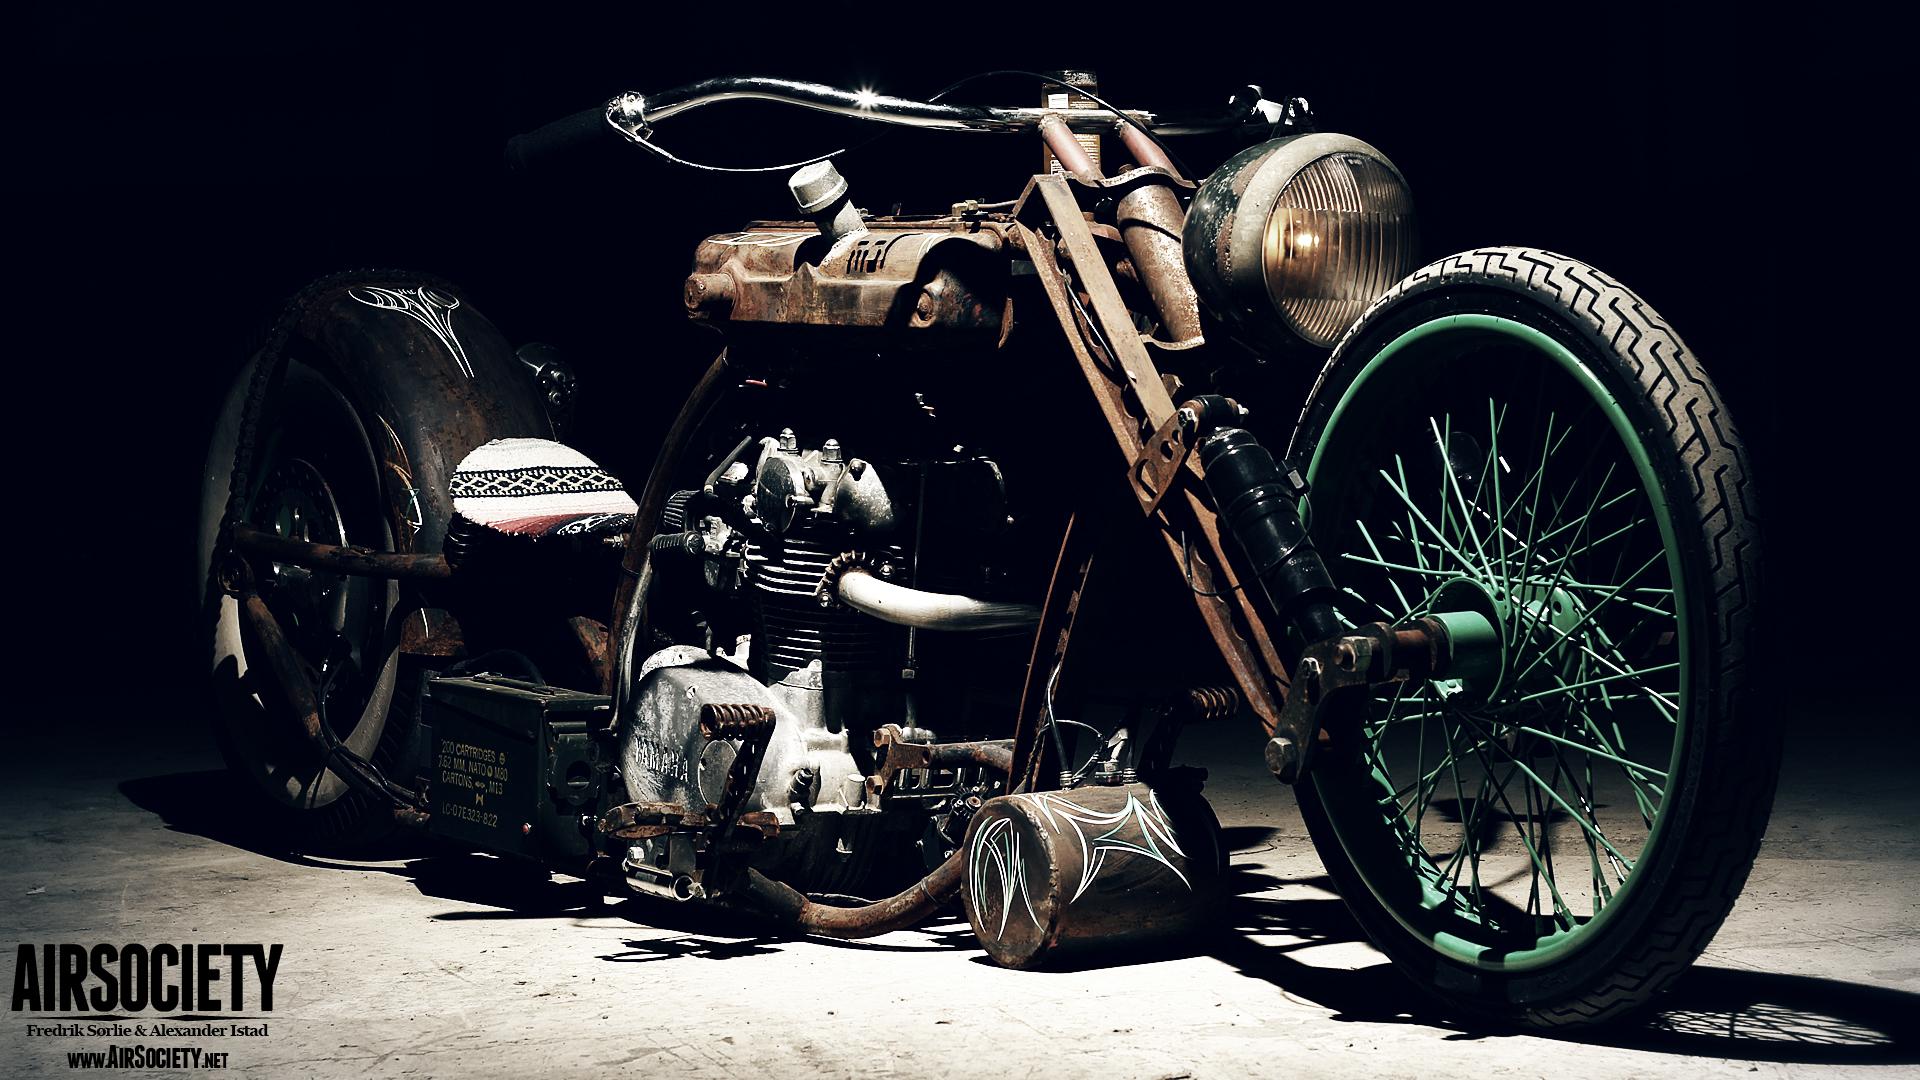 Old Motorcycle Wallpaper Archive